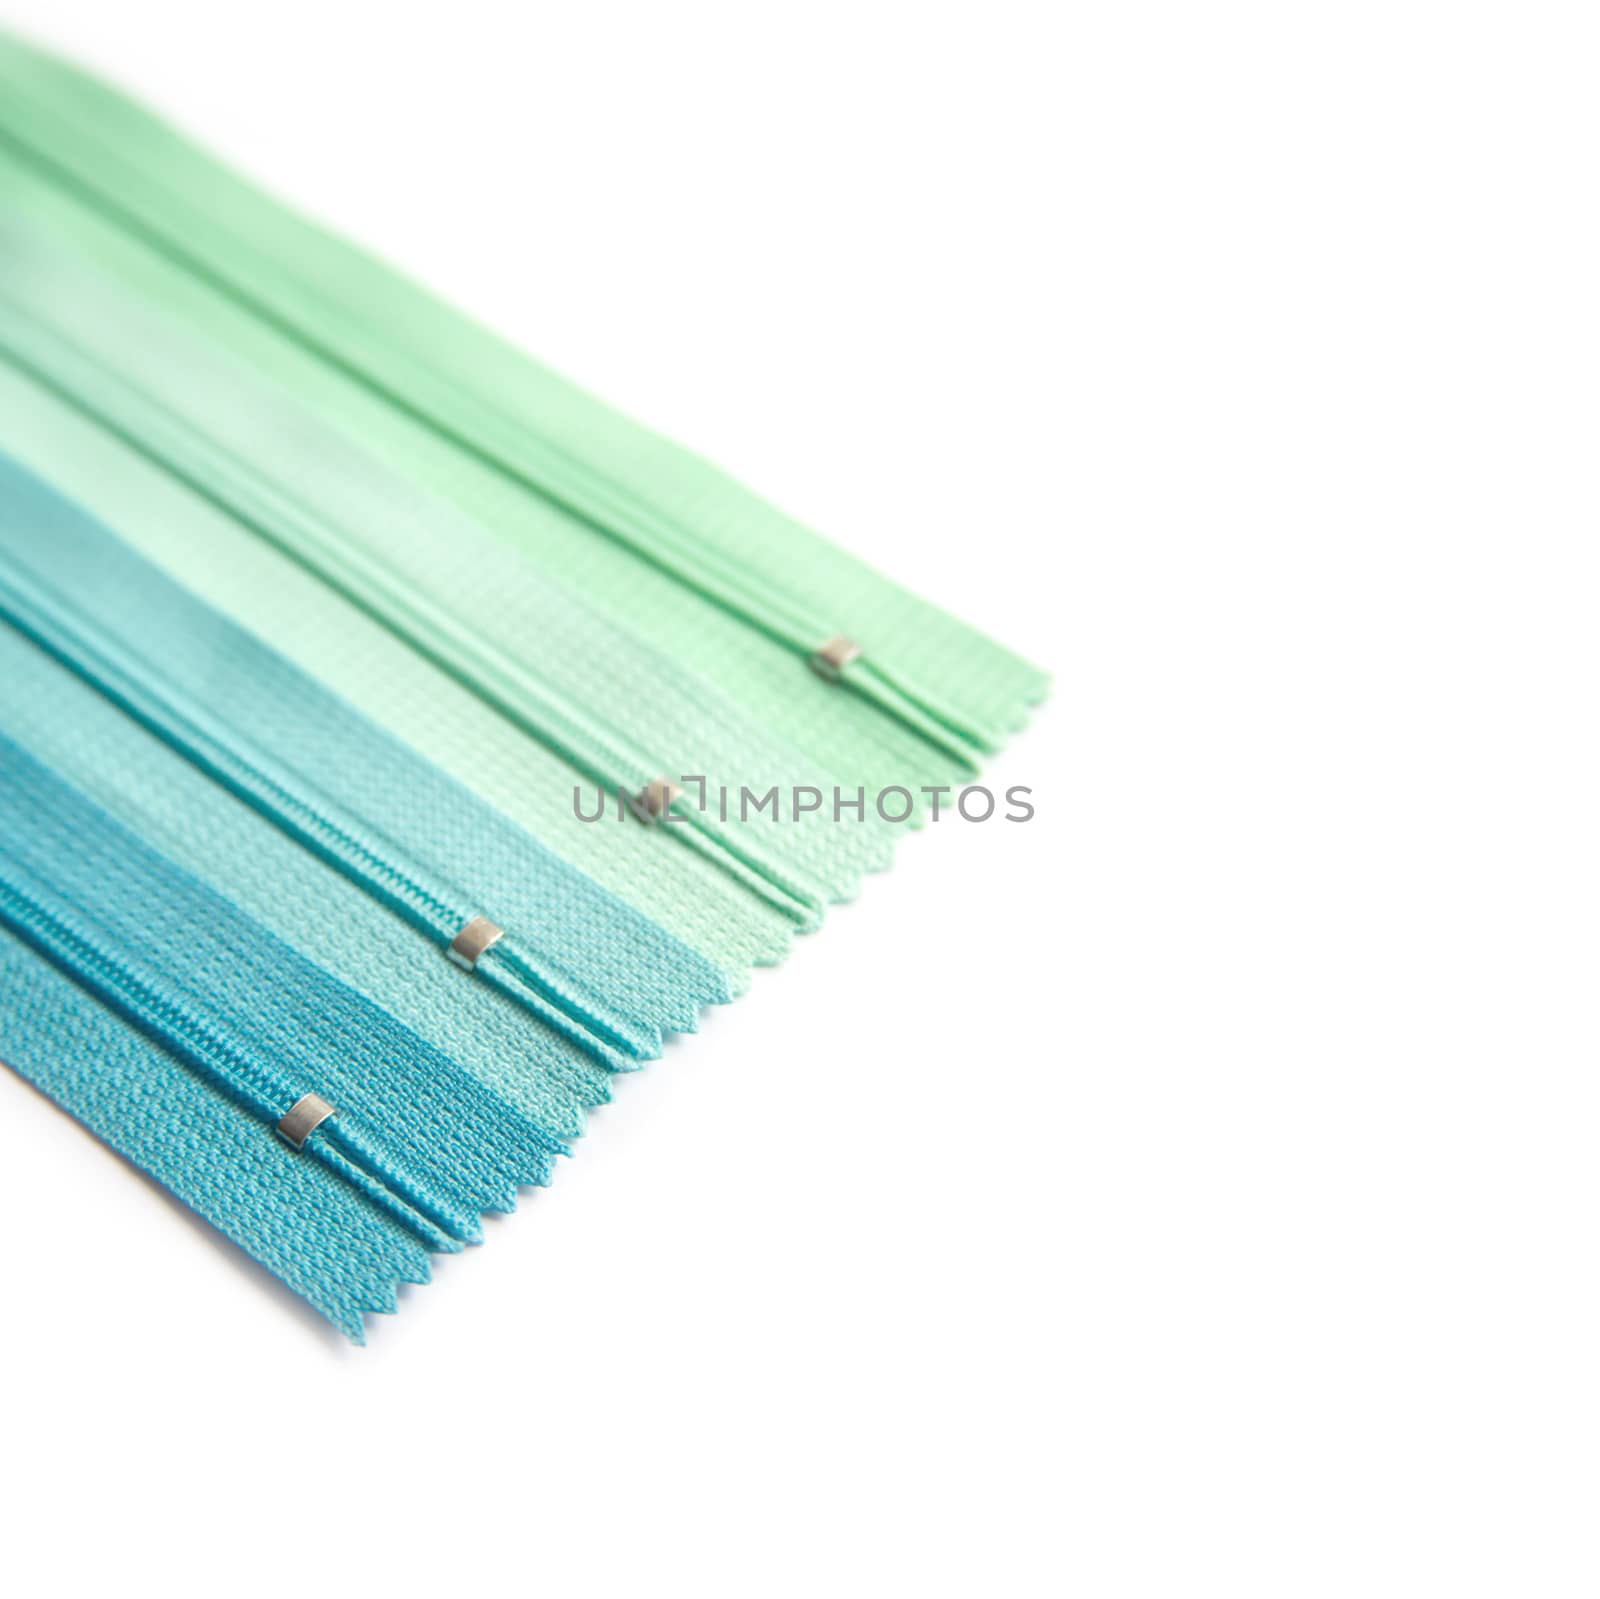 Zipper pastel blue and green end set isolated on white background